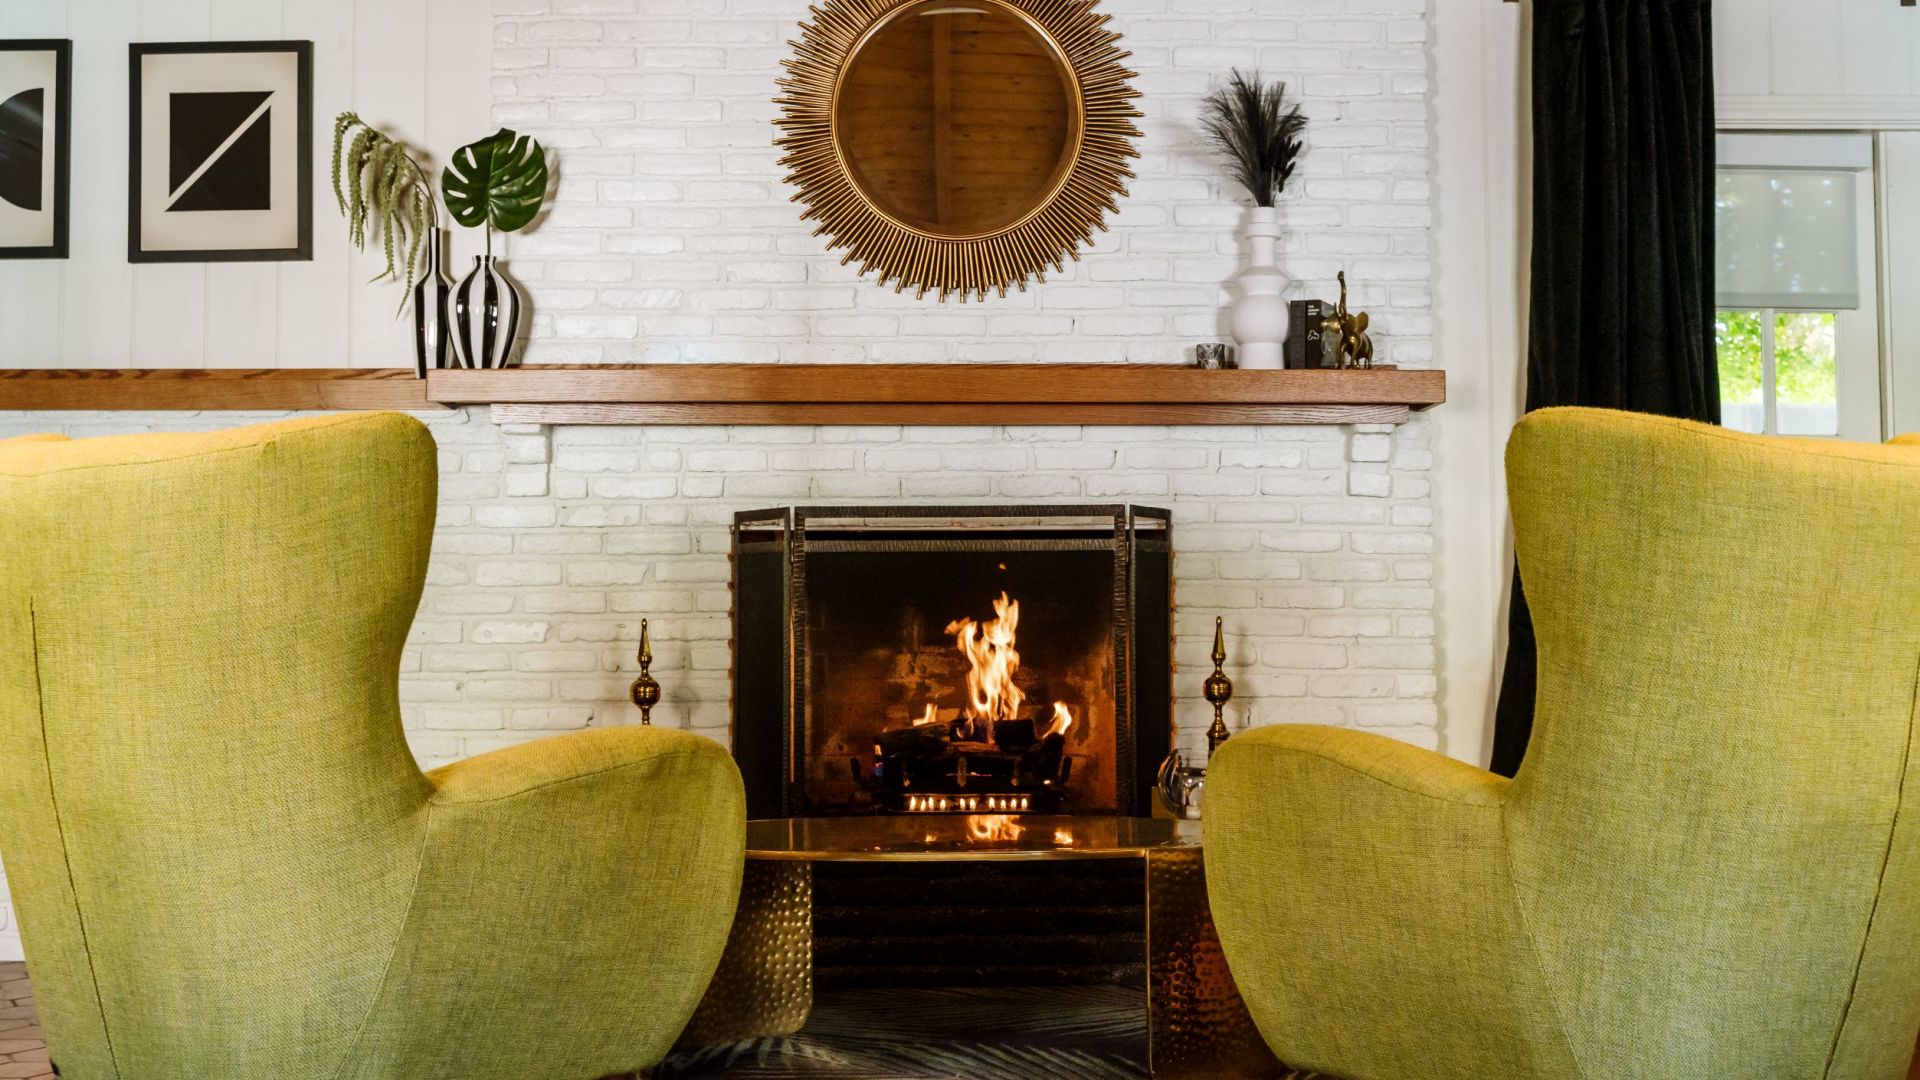 A Fire Place Sitting In A Living Room With A Fireplace